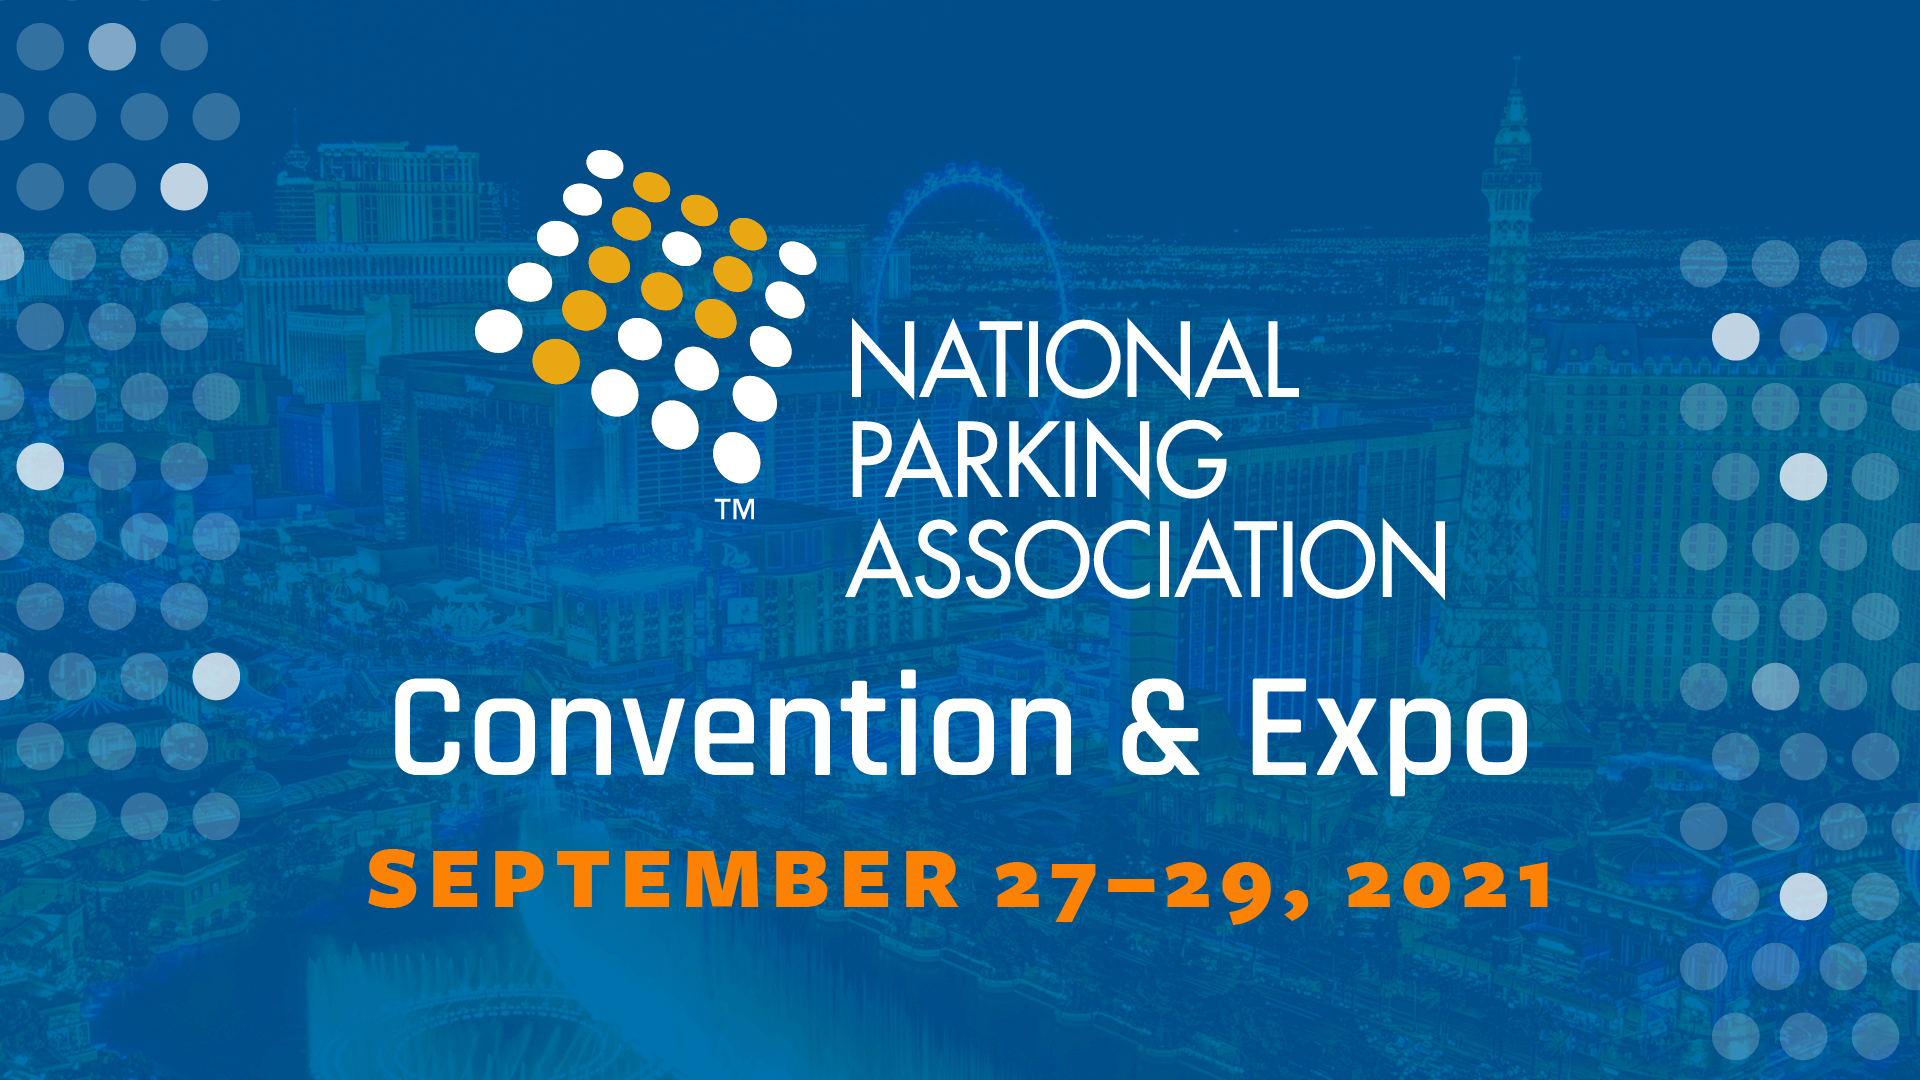 National Parking Association Convention & Expo - September 27-29, 2021